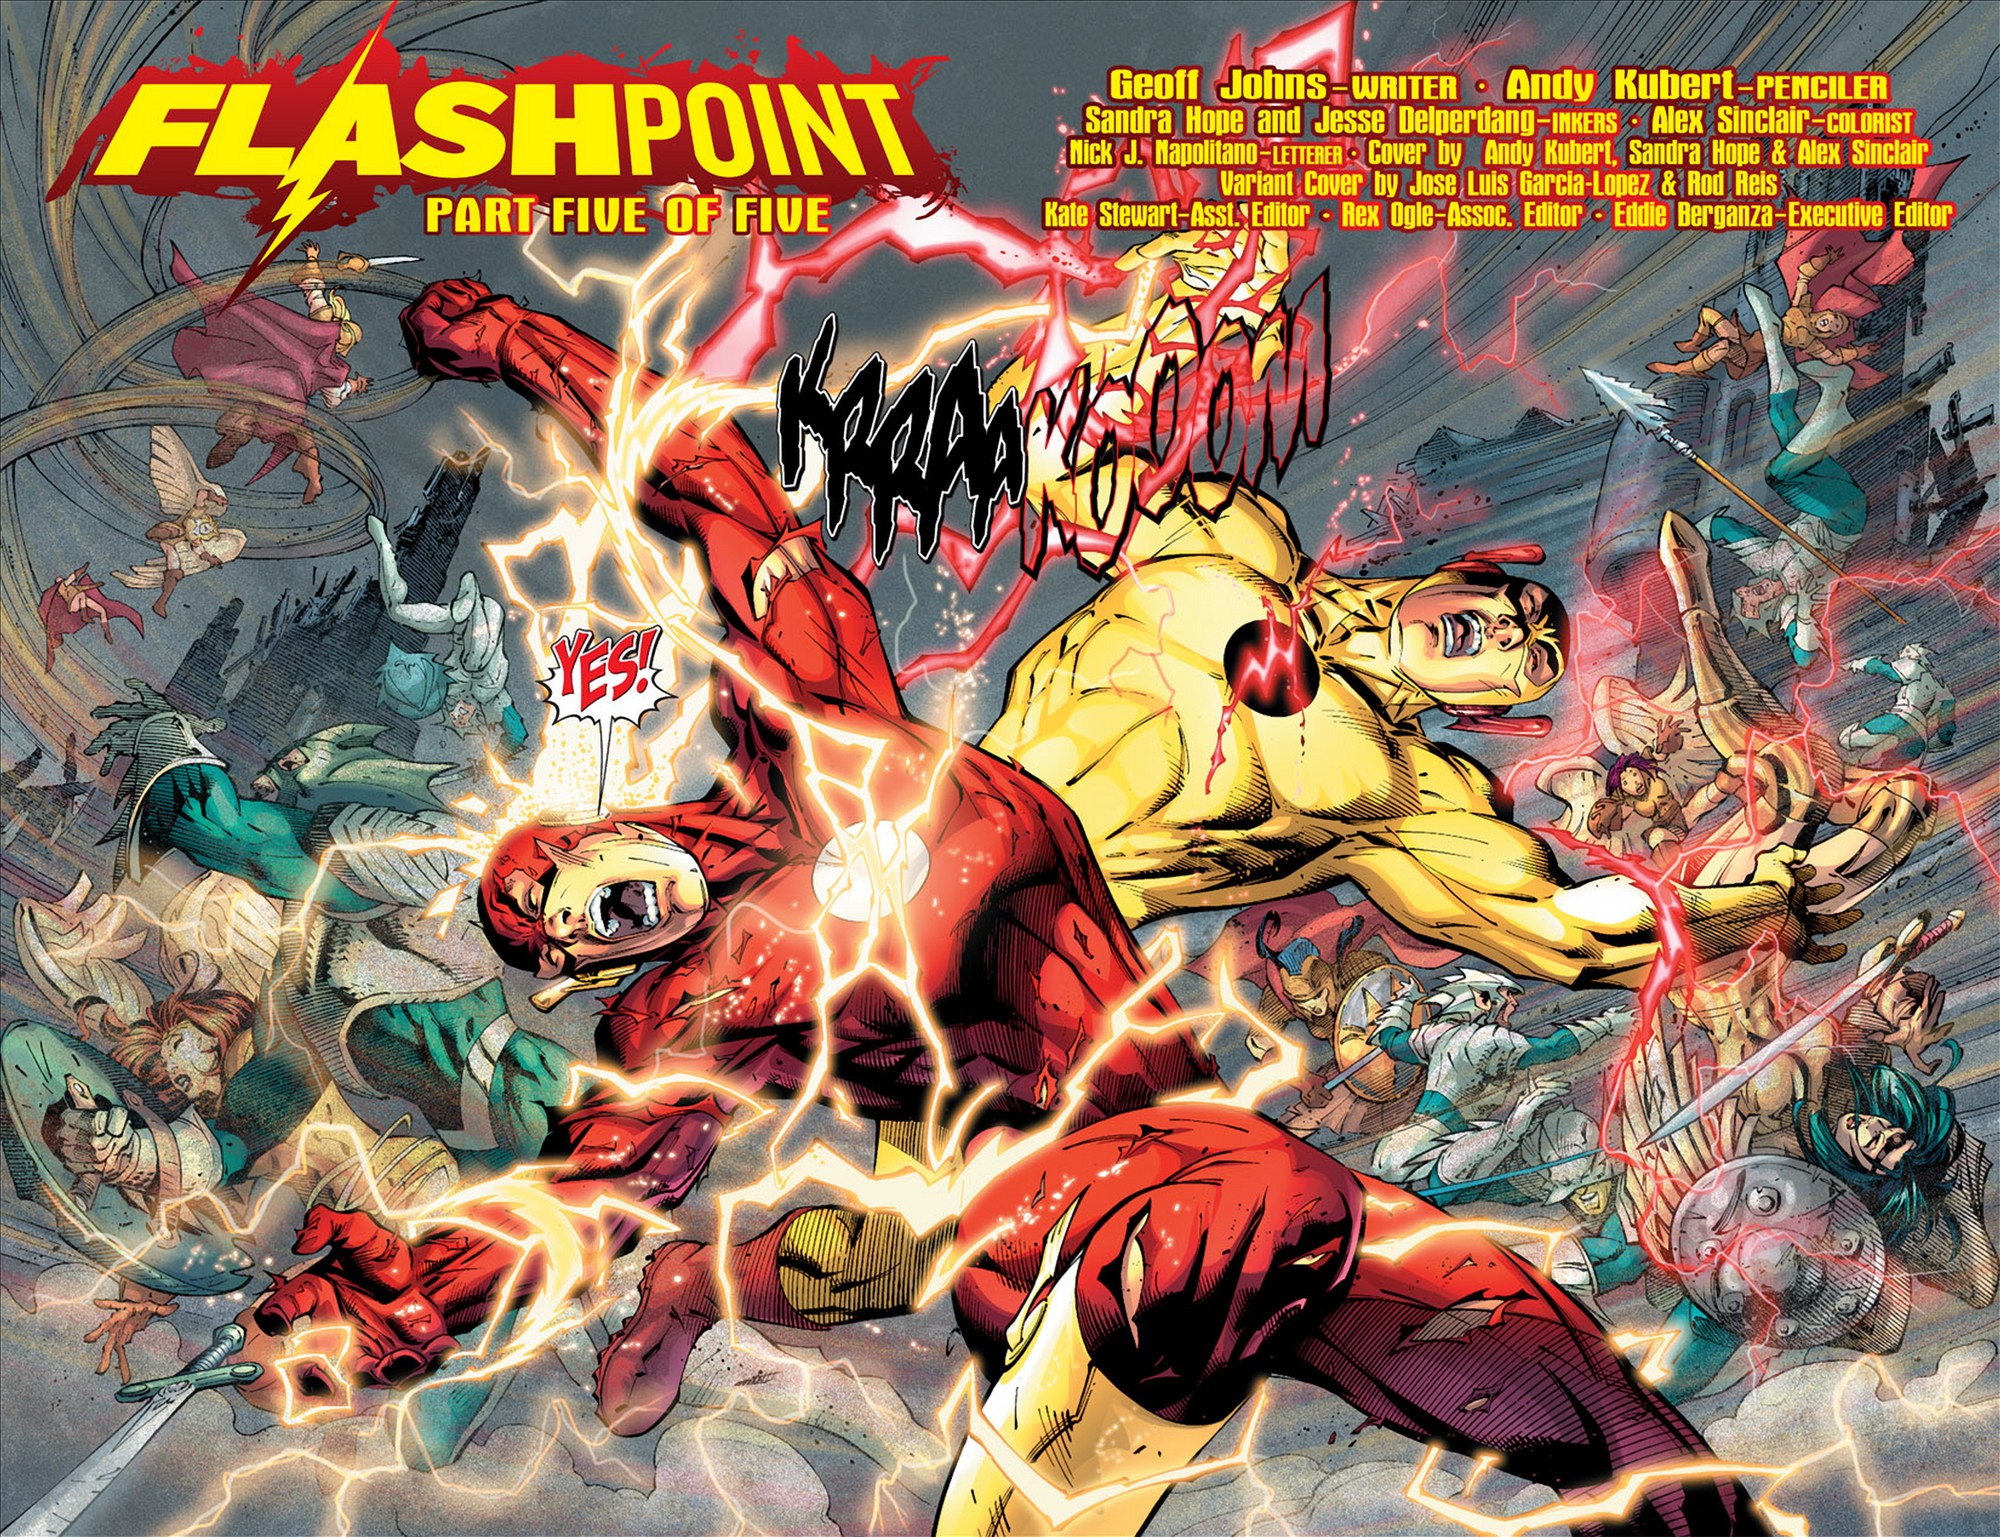 Read online Flashpoint comic -  Issue #5 - 8